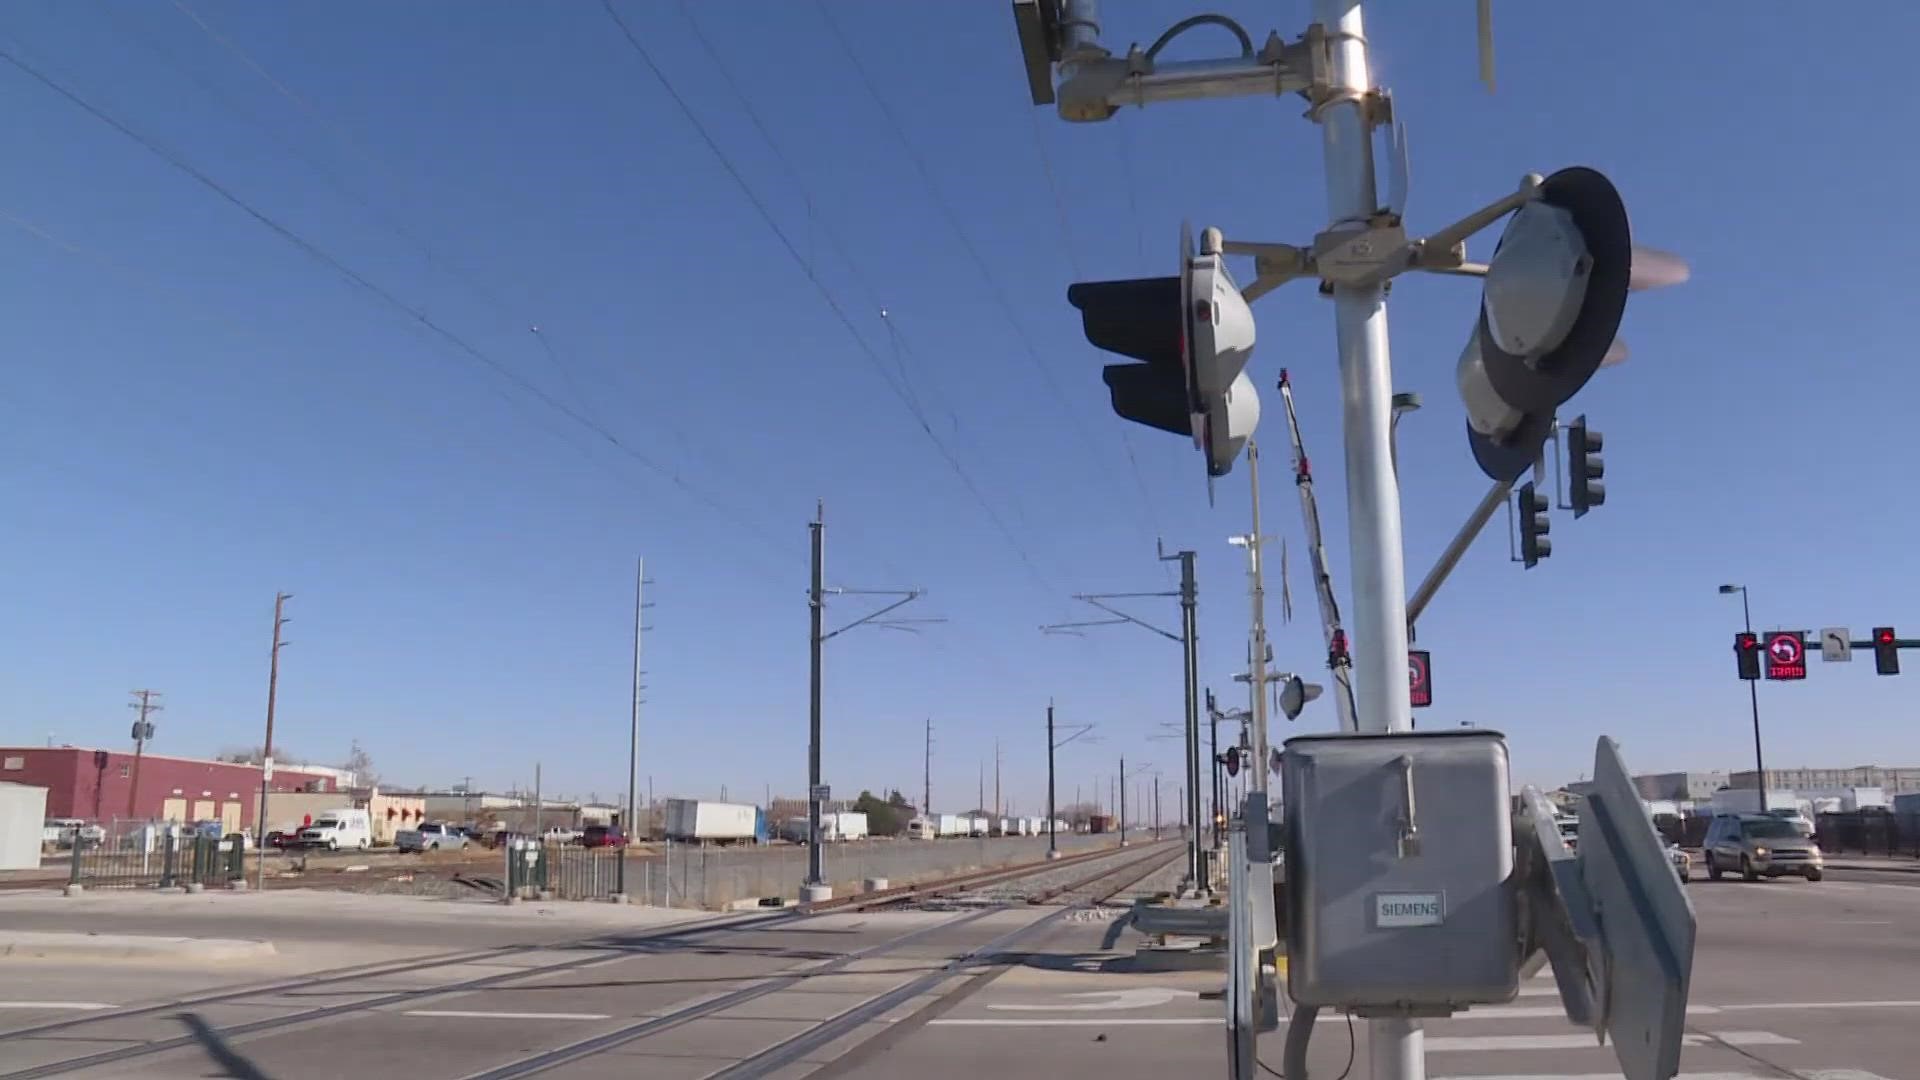 RTD learned today it will not have to pay up more than $100 million, ending a long legal fight over its malfunctioning crossing gates.